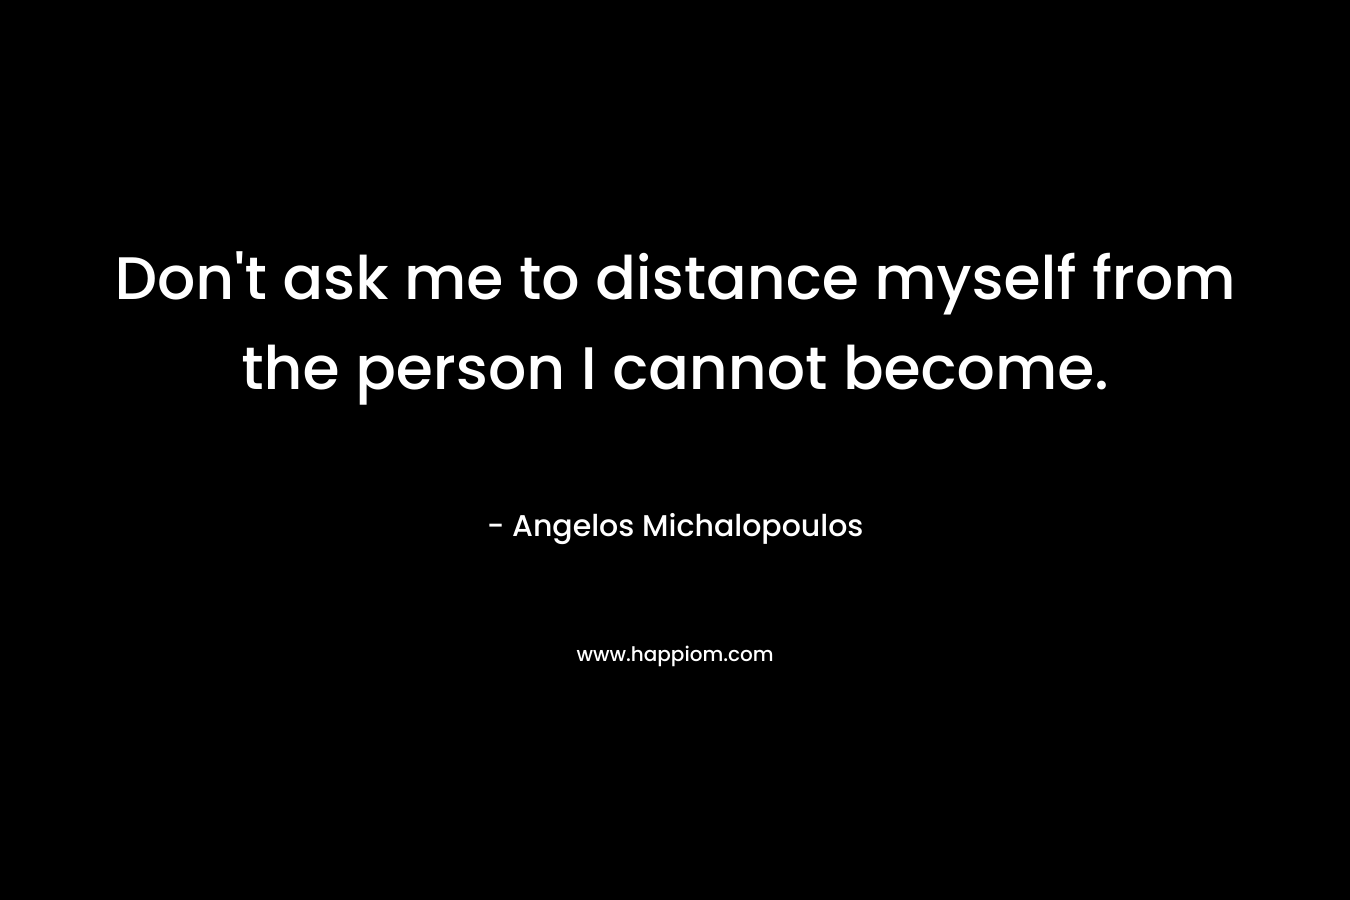 Don't ask me to distance myself from the person I cannot become.